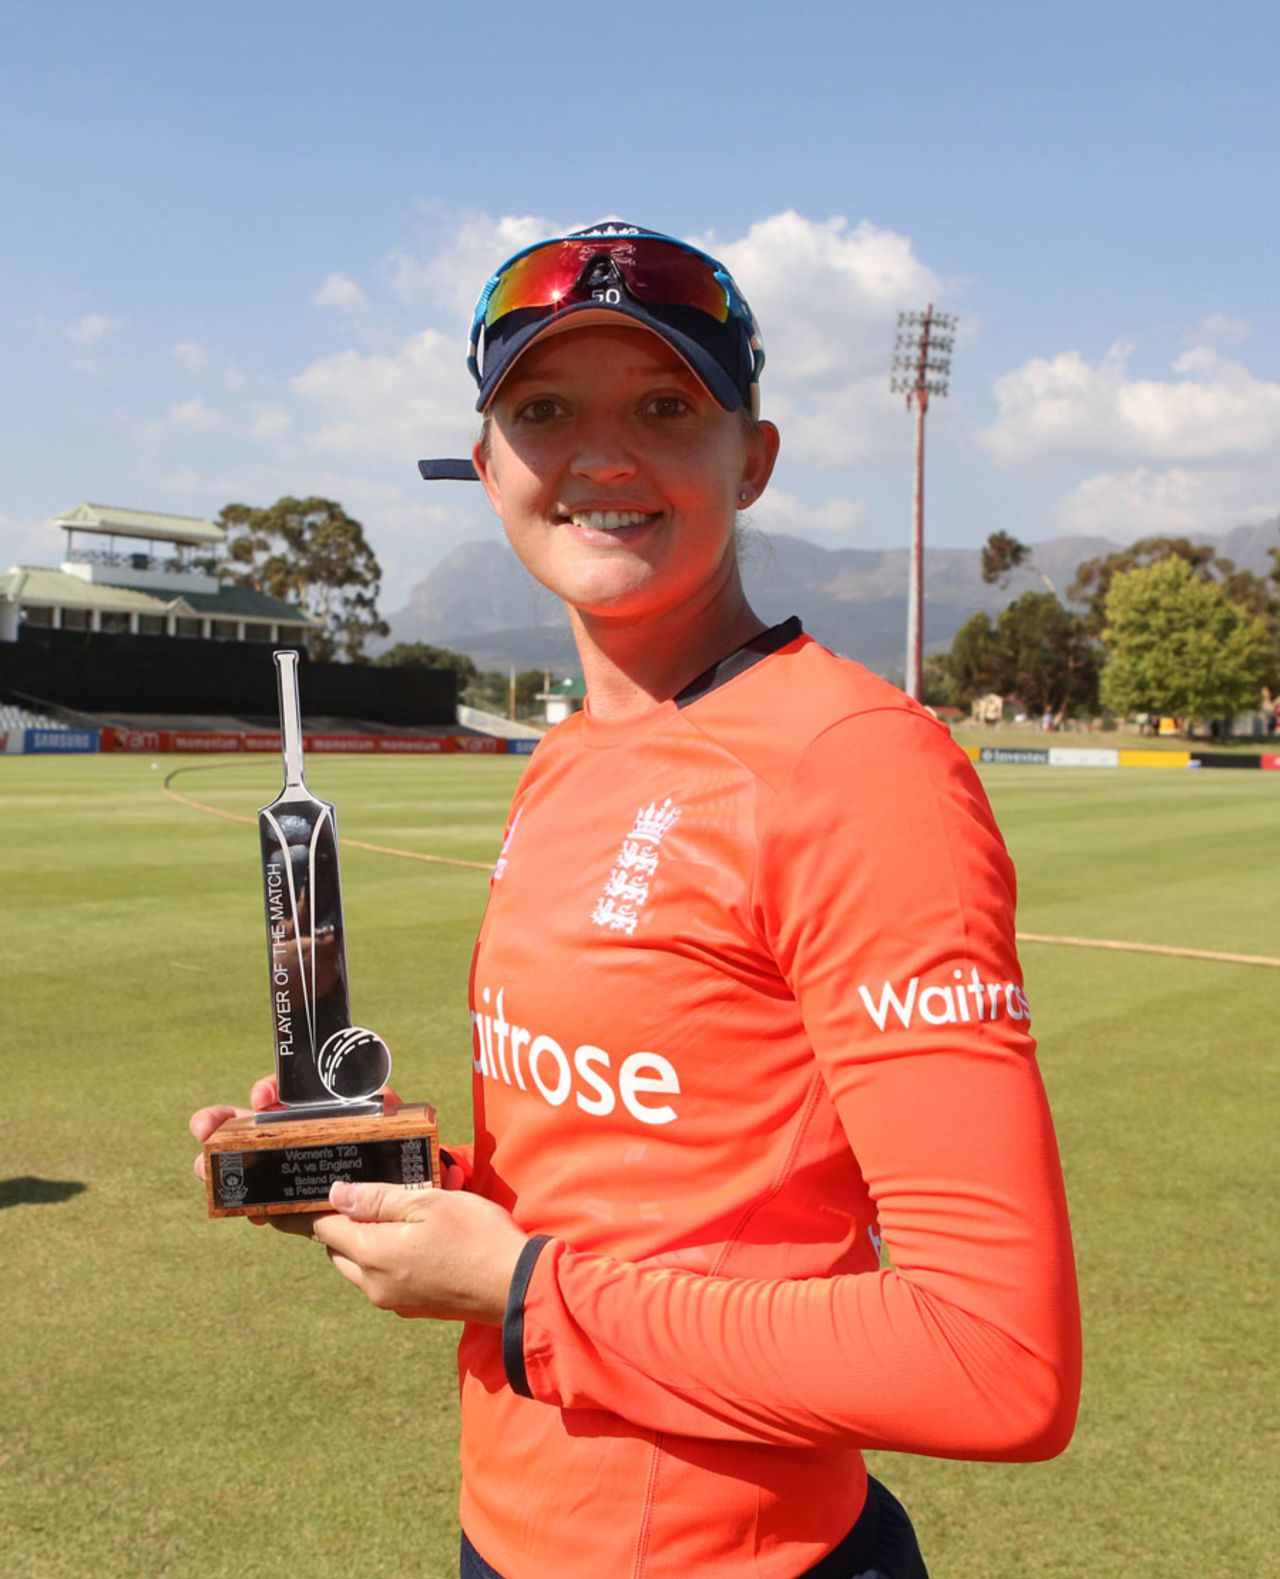 Sarah Taylor was named Player of the Match, South Africa v England, 1st women's T20, Paarl, February 18, 2016